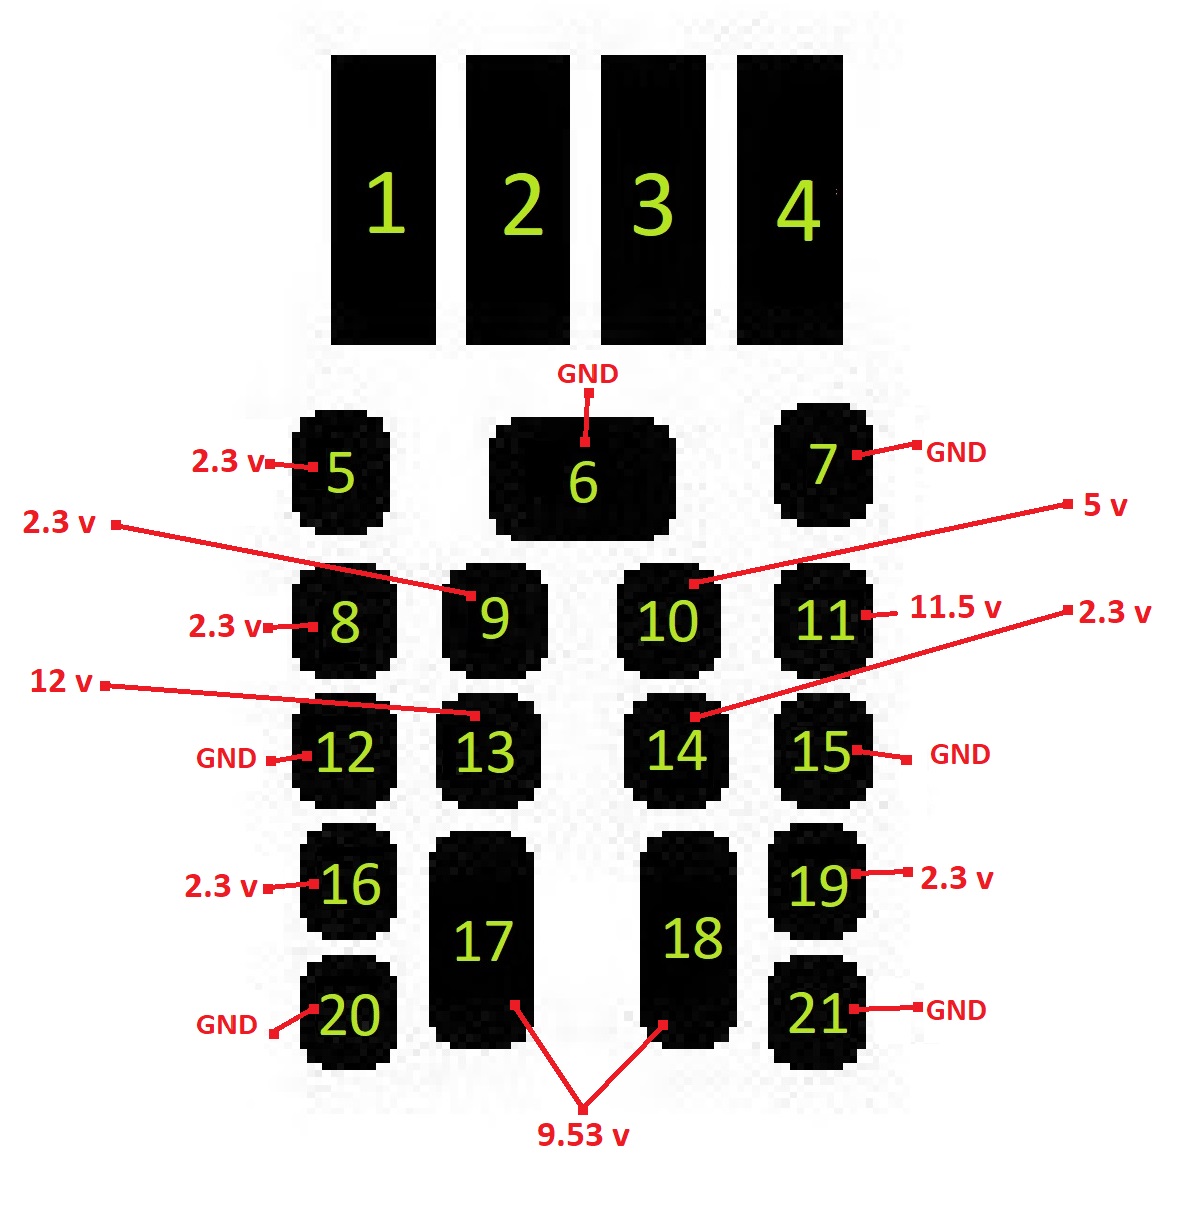 numbering of contacts